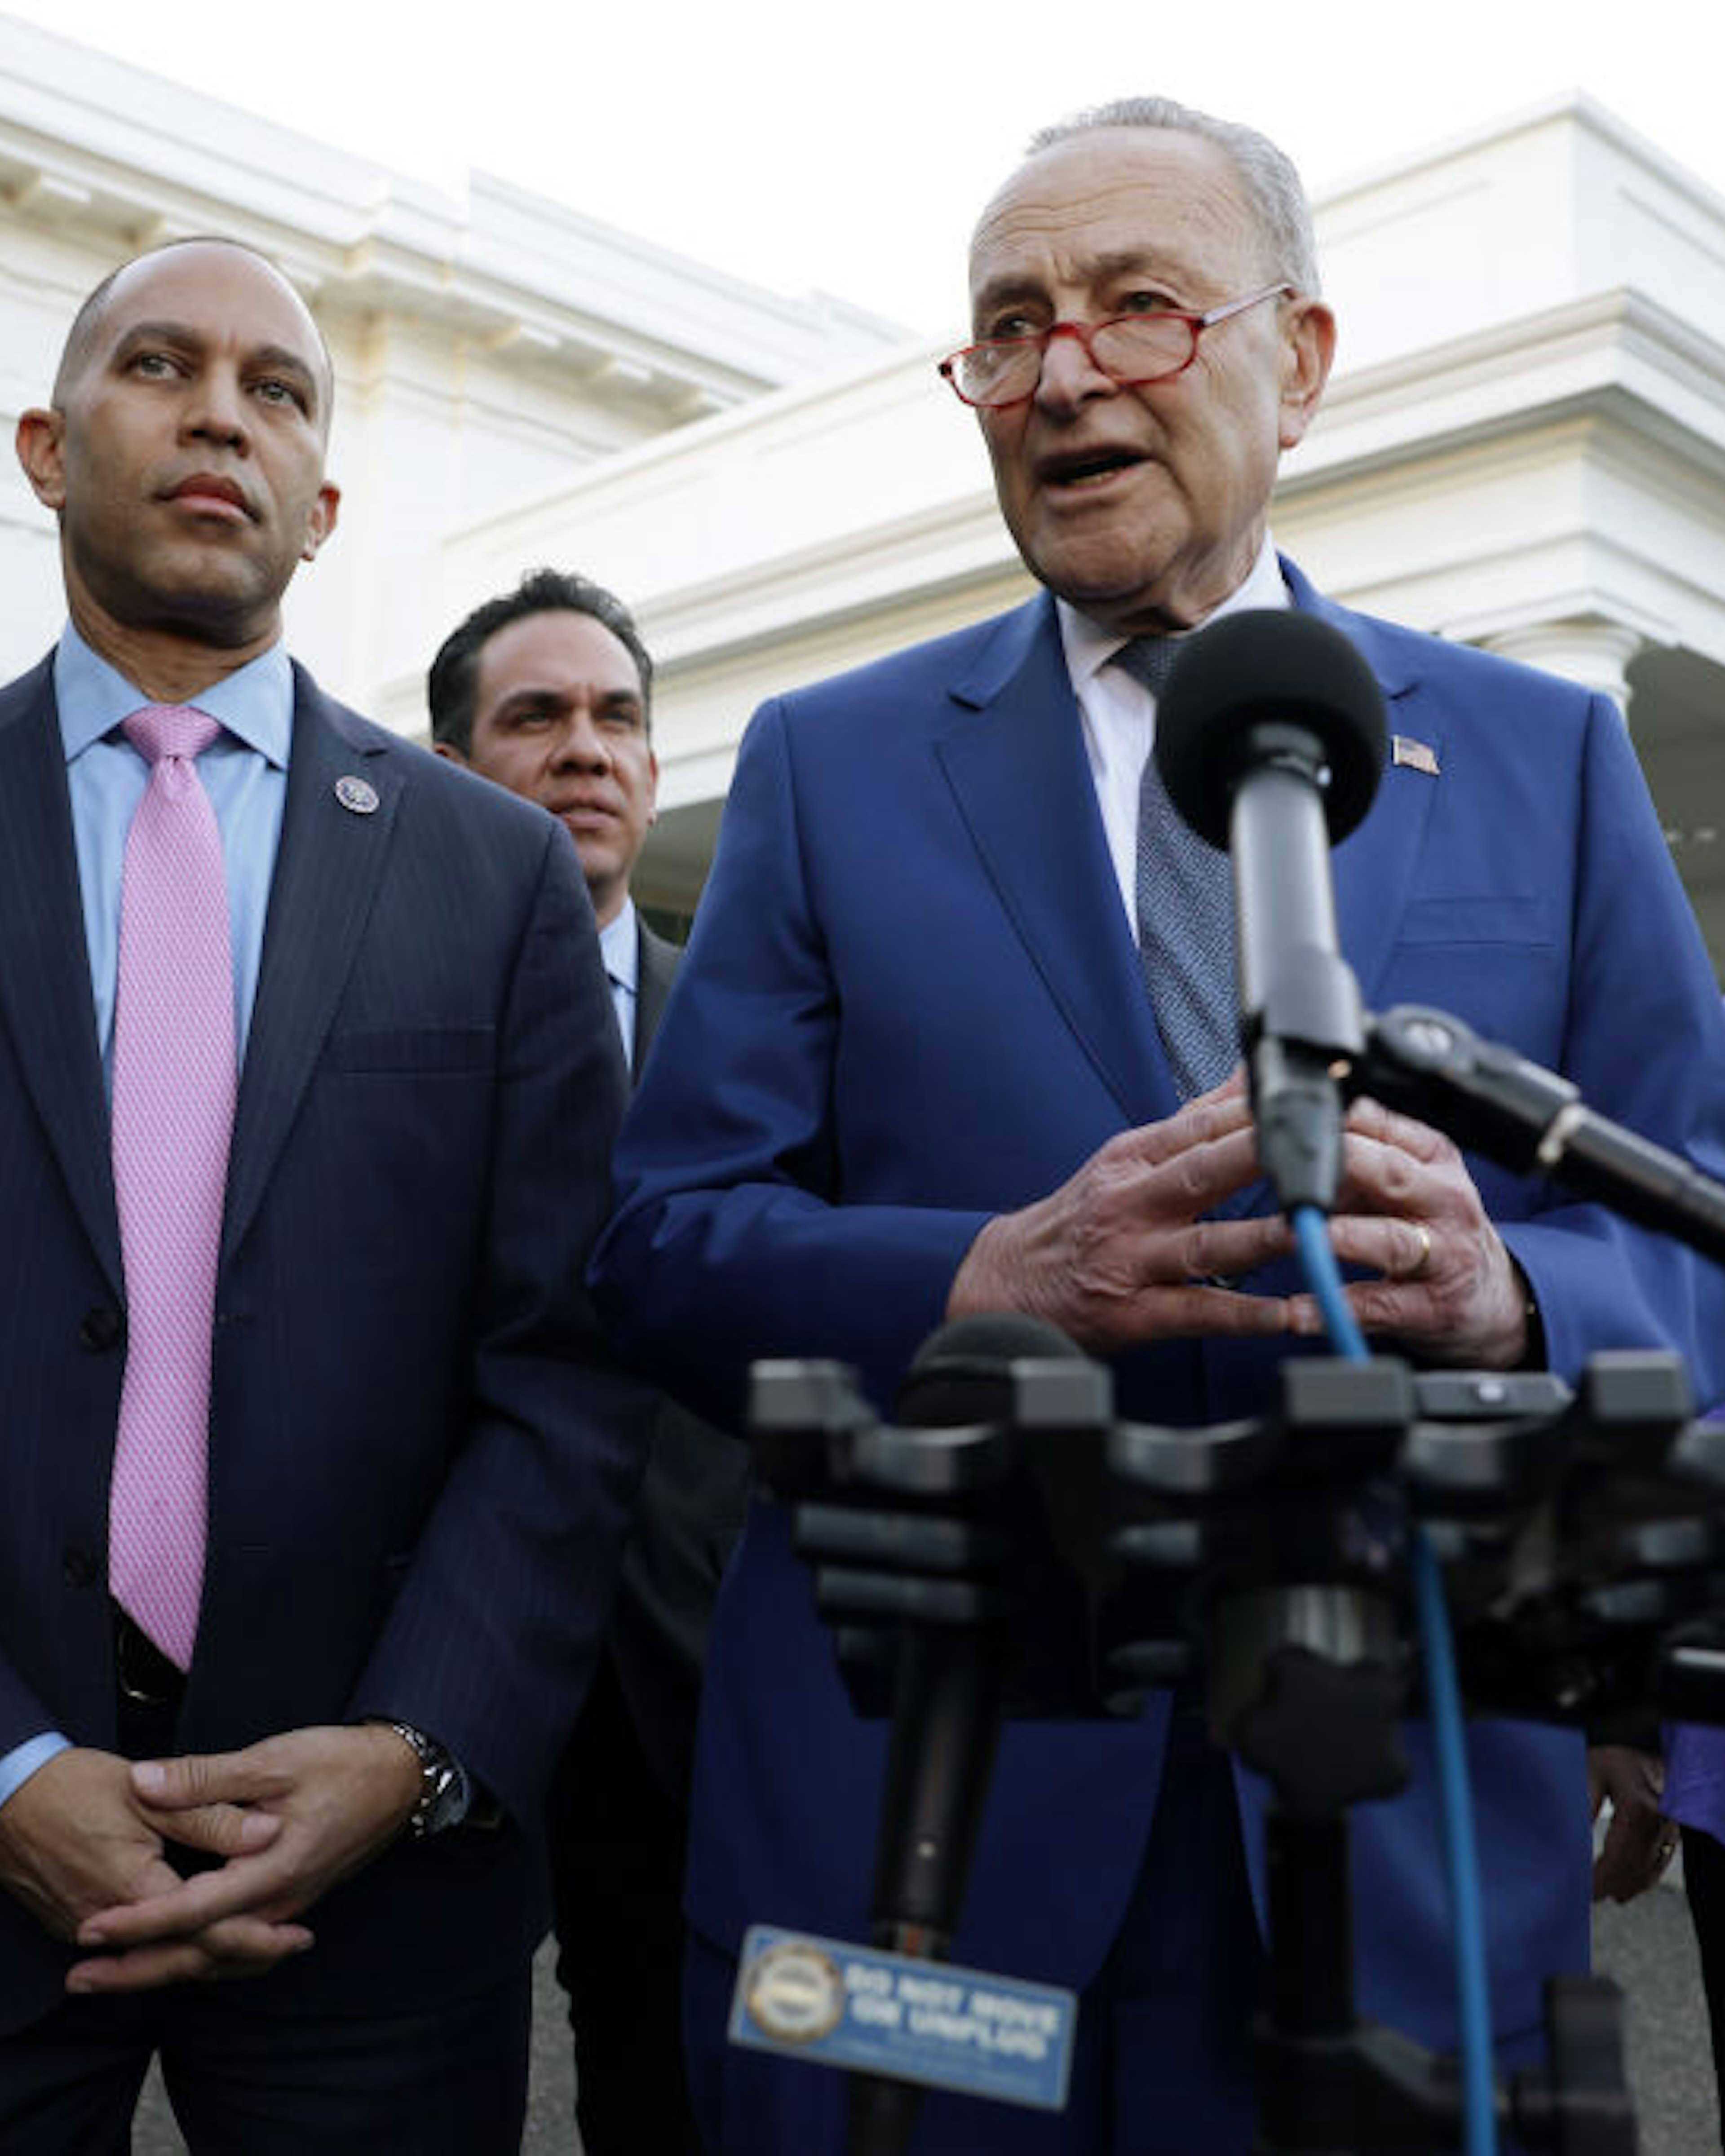 WASHINGTON, DC - JANUARY 24: U.S. Senate Majority Leader Sen. Chuck Schumer (D-NY) speaks to members of the press outside the West Wing as (L-R) House Minority Whip Rep. Katherine Clark (D-CT), House Minority Leader Rep. Hakeem Jeffries (D-NY), House Democratic Caucus Chairman Rep. Pete Aguilar (D-CA) and Sen. Debbie Stabenow (D-MI) listen after a meeting with President Joe Biden at the White House on January 24, 2023 in Washington, DC. President Biden hosted Democratic Congressional leaders to discuss Democratic agenda. (Photo by Alex Wong/Getty Images)